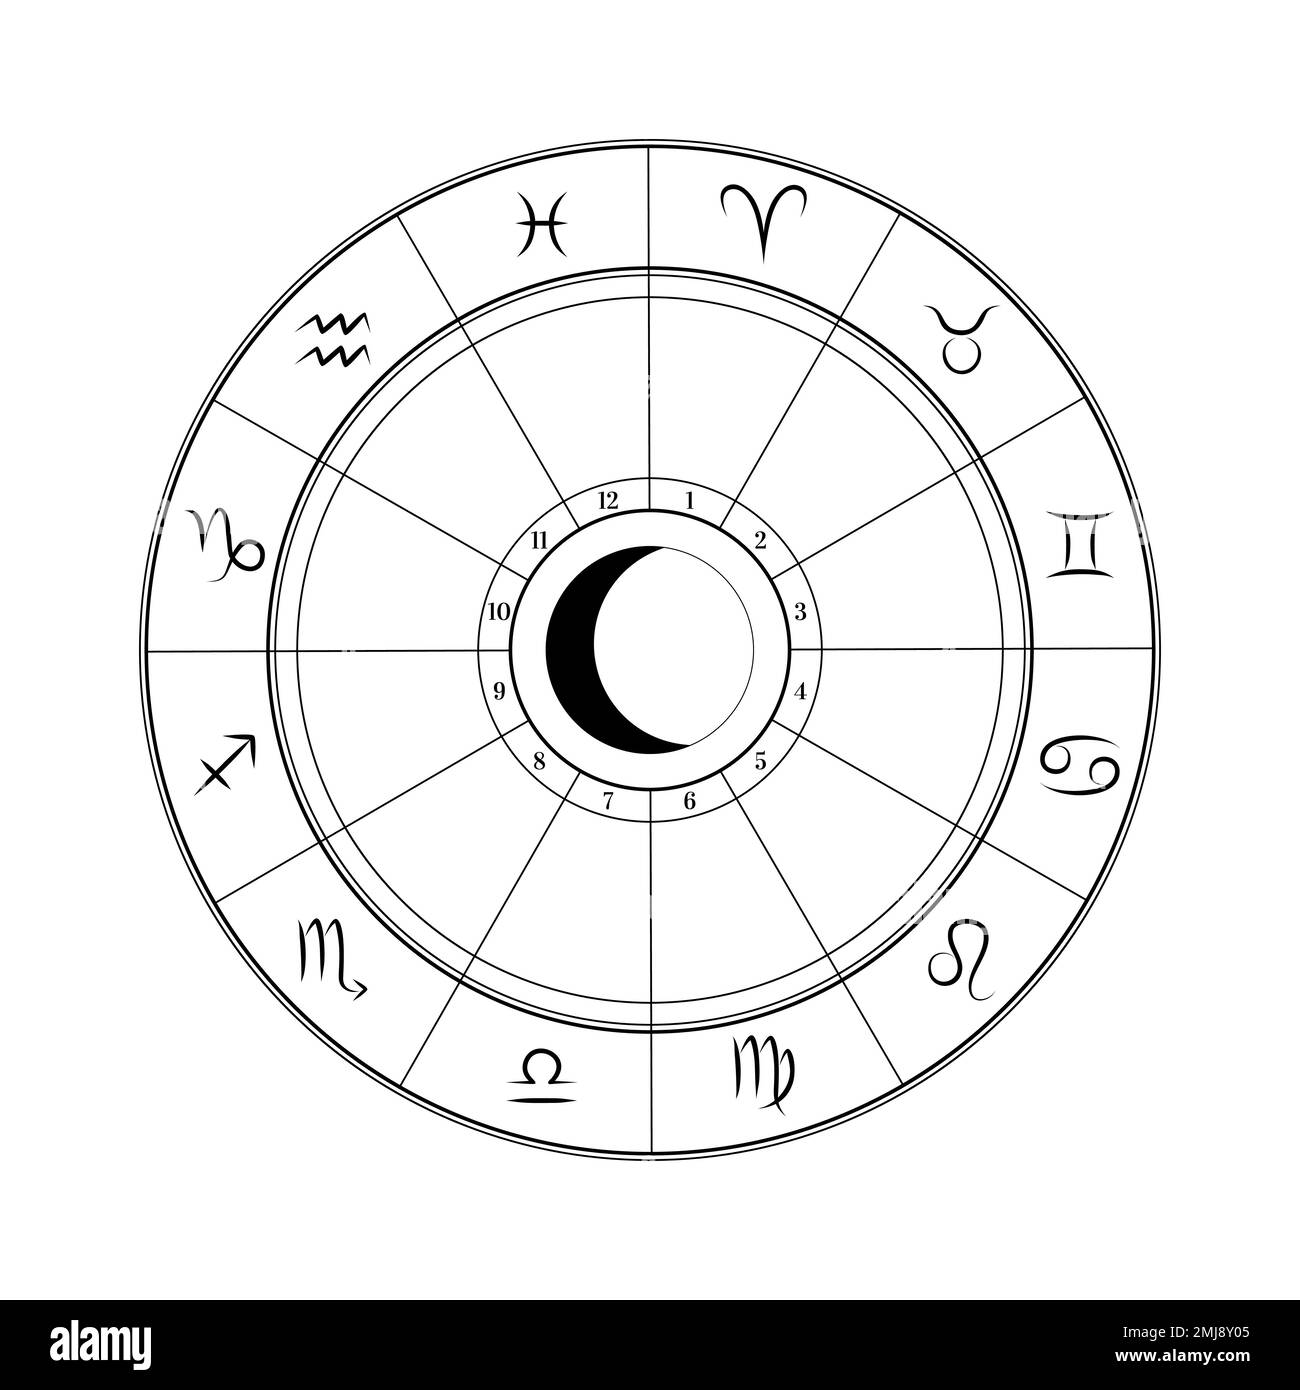 Astrological zodiac circle wheel with zodiac signs for horoscope ...